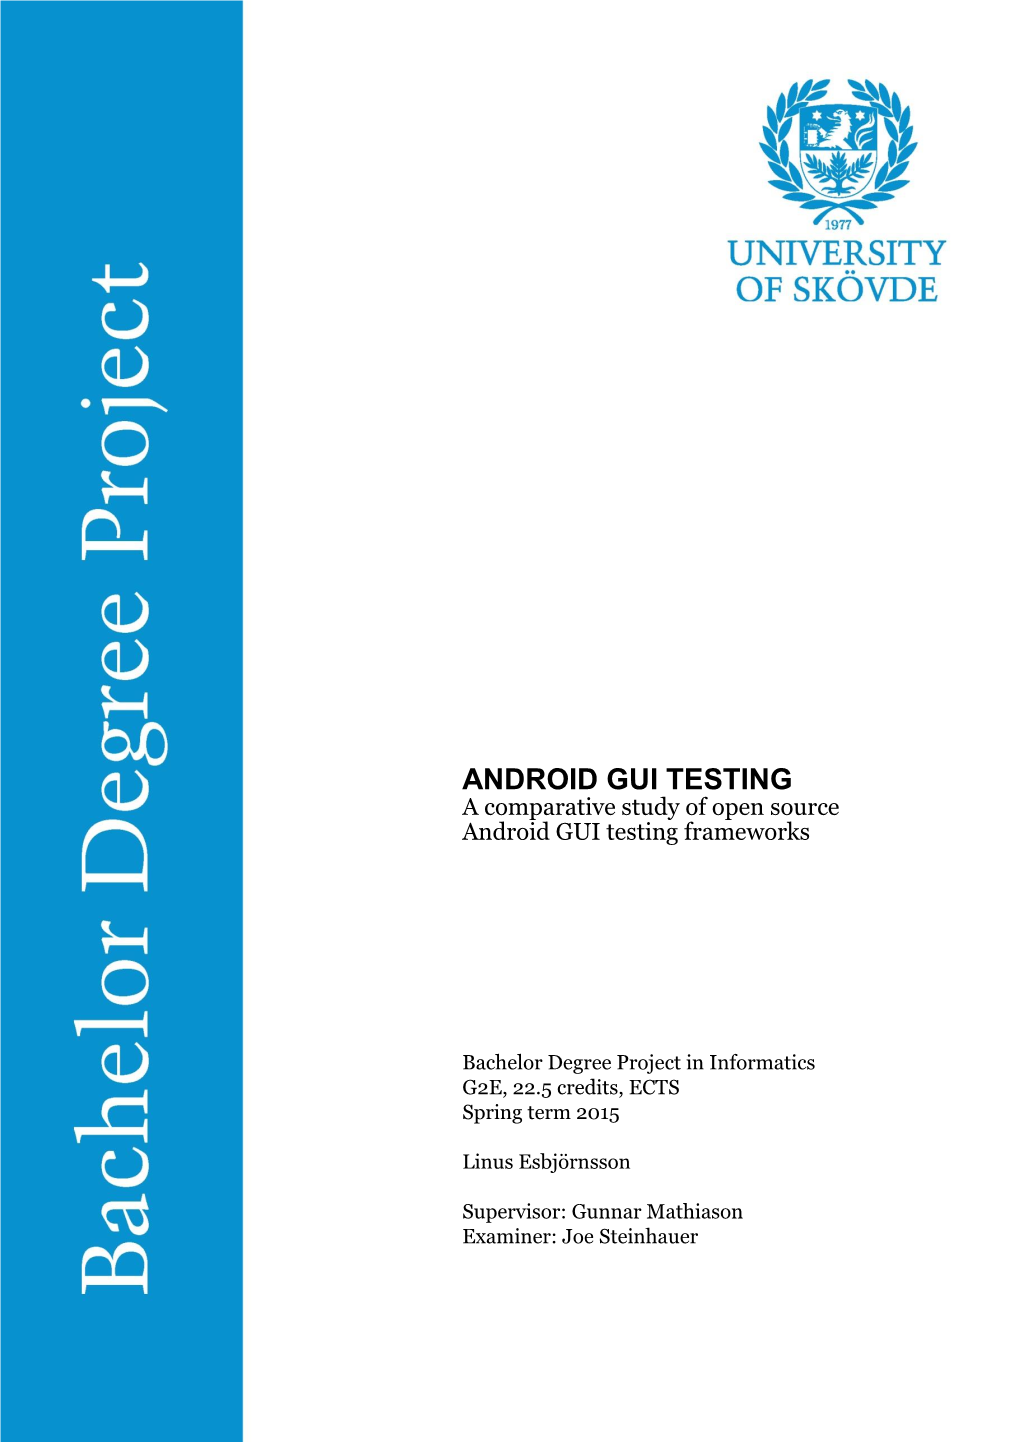 ANDROID GUI TESTING a Comparative Study of Open Source Android GUI Testing Frameworks